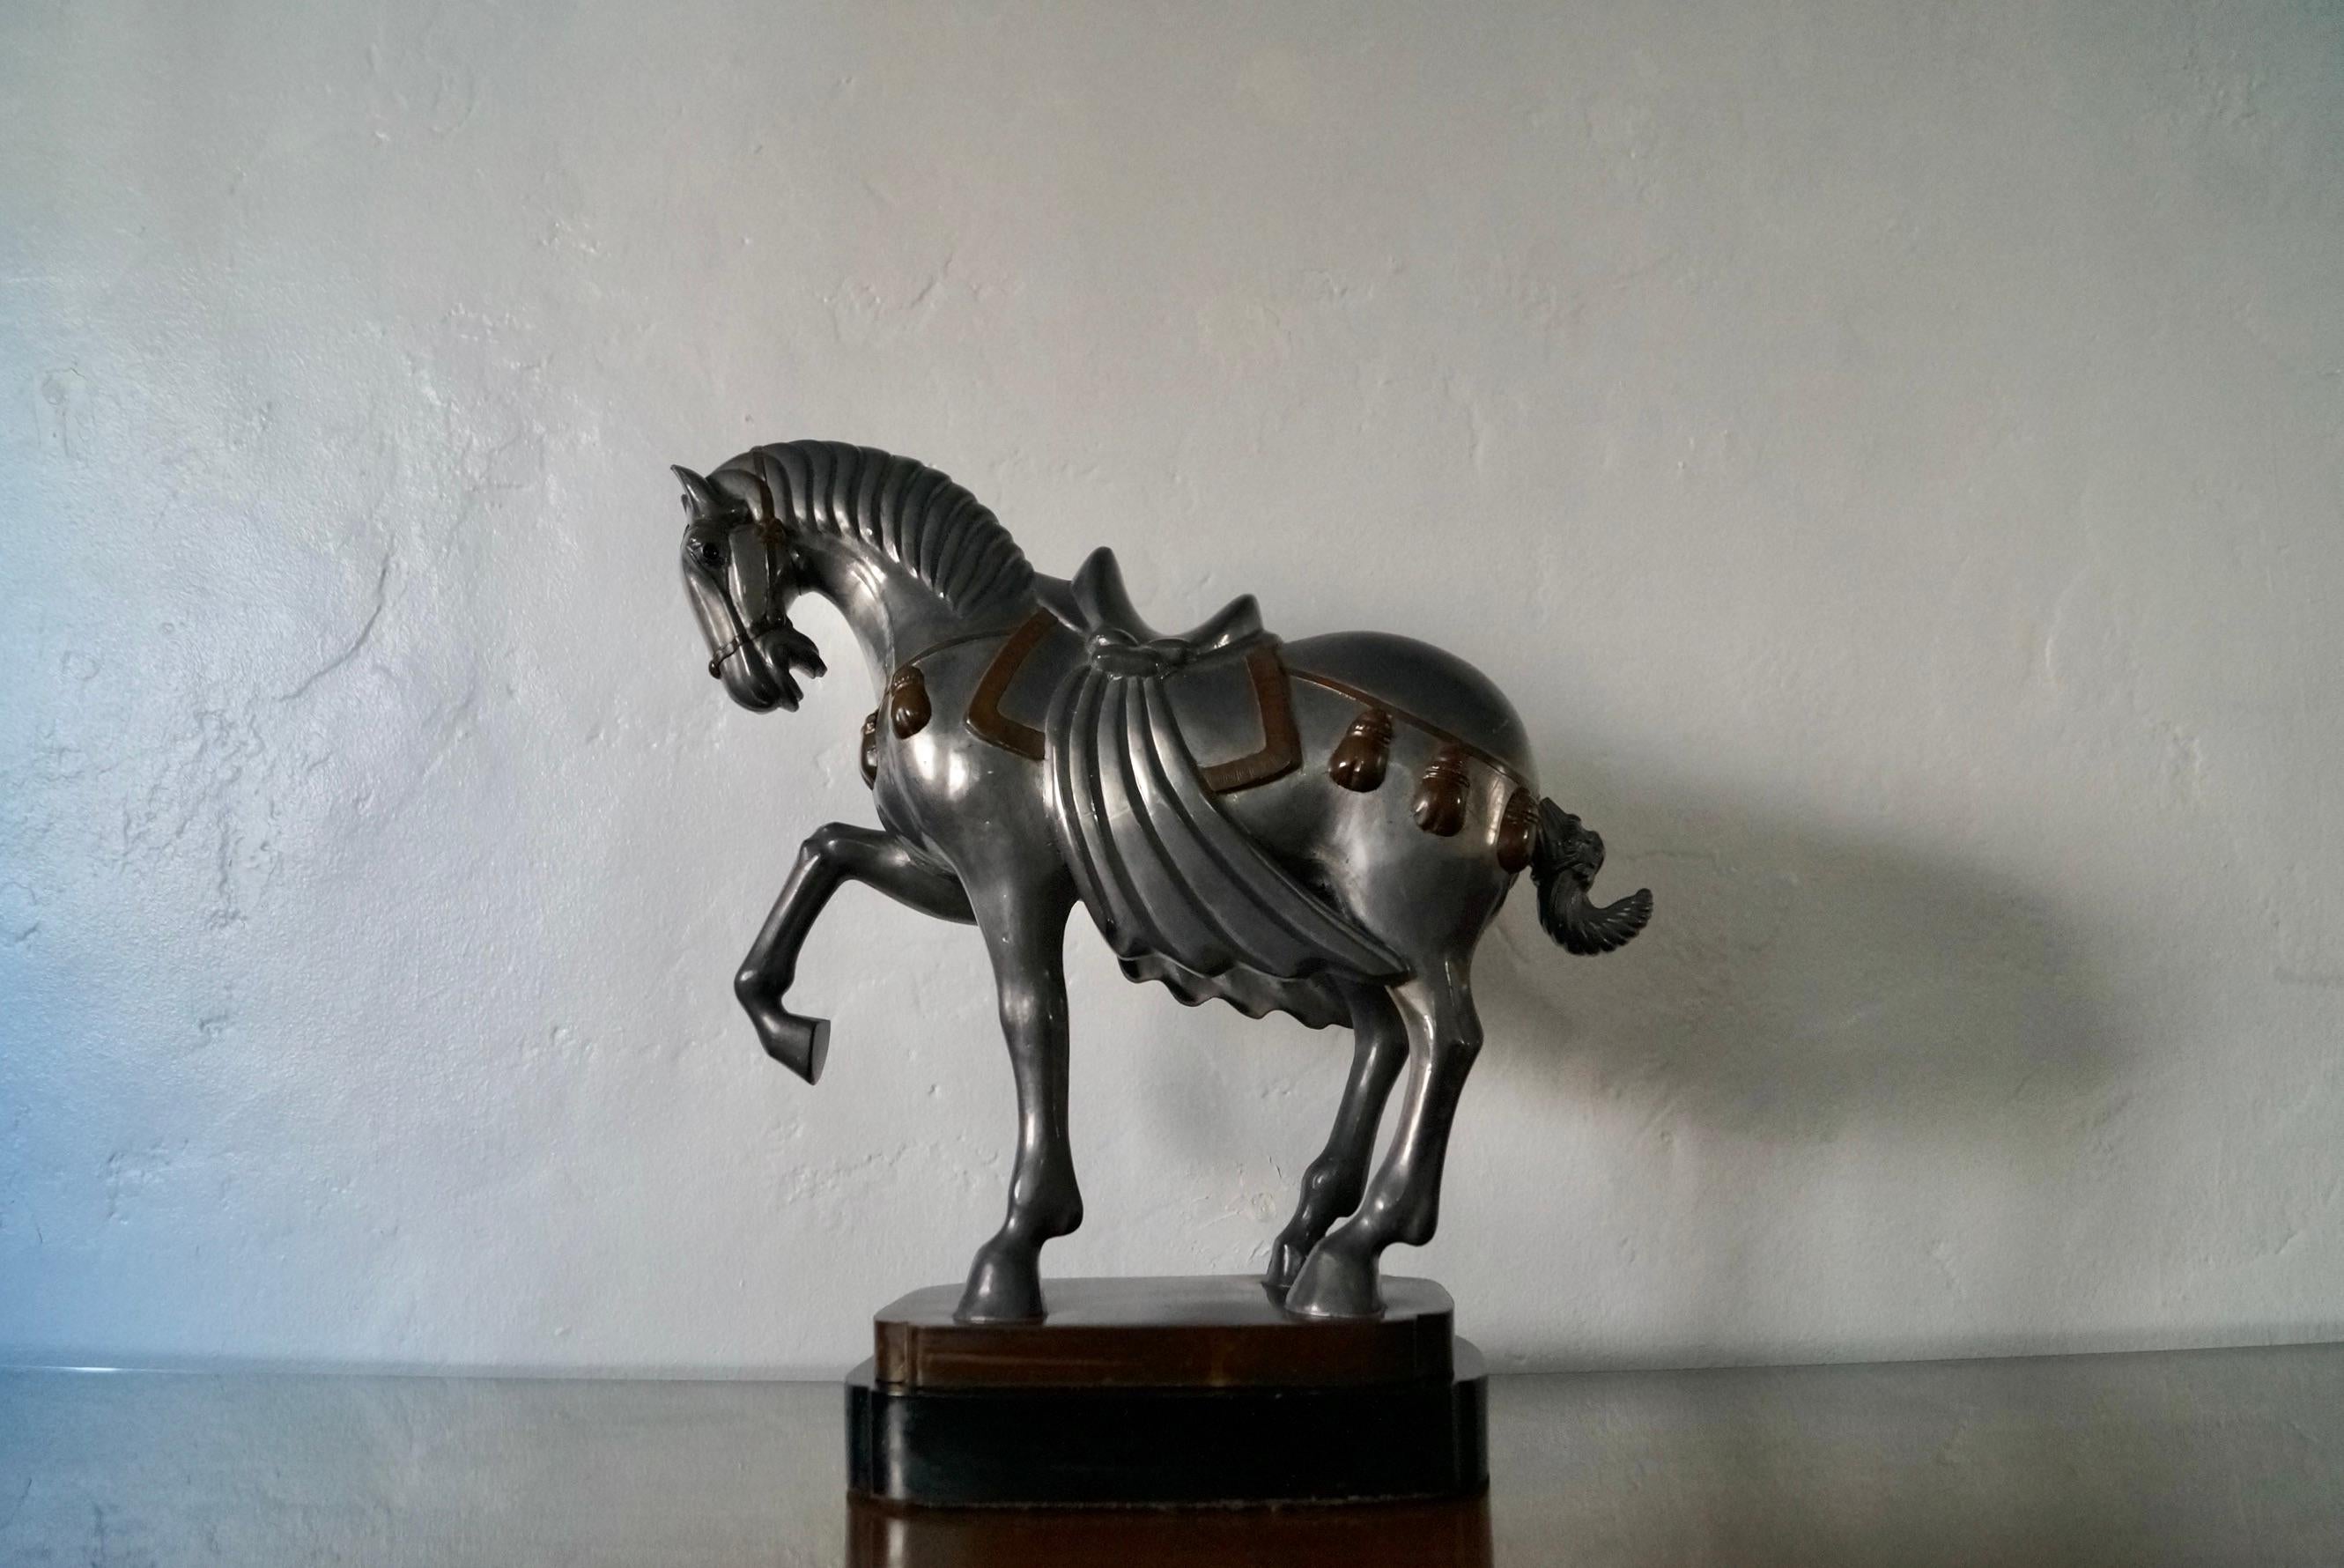 Antique horse statue for sale. Made of pewter and solid brass, and has a solid wood base. It’s really heavy and well made, and a beautiful decorative object. The pewter color and brass accents goes nicely. The horse is in a regal pose. Great